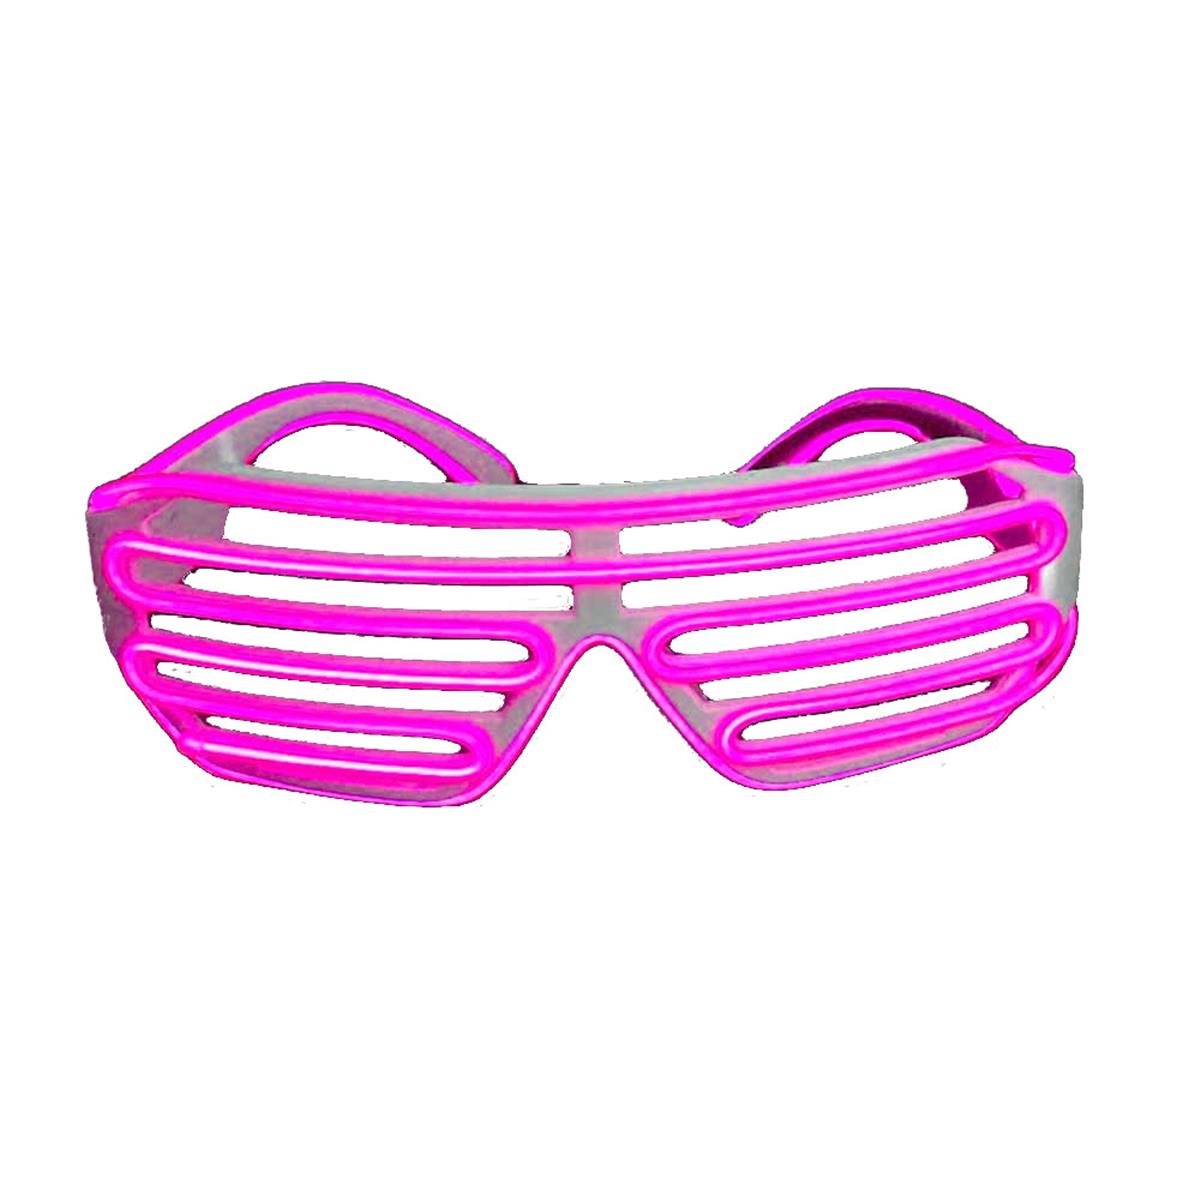 Picture of Blinkee 185186 Electro Luminescent Shutter Shades, Pink